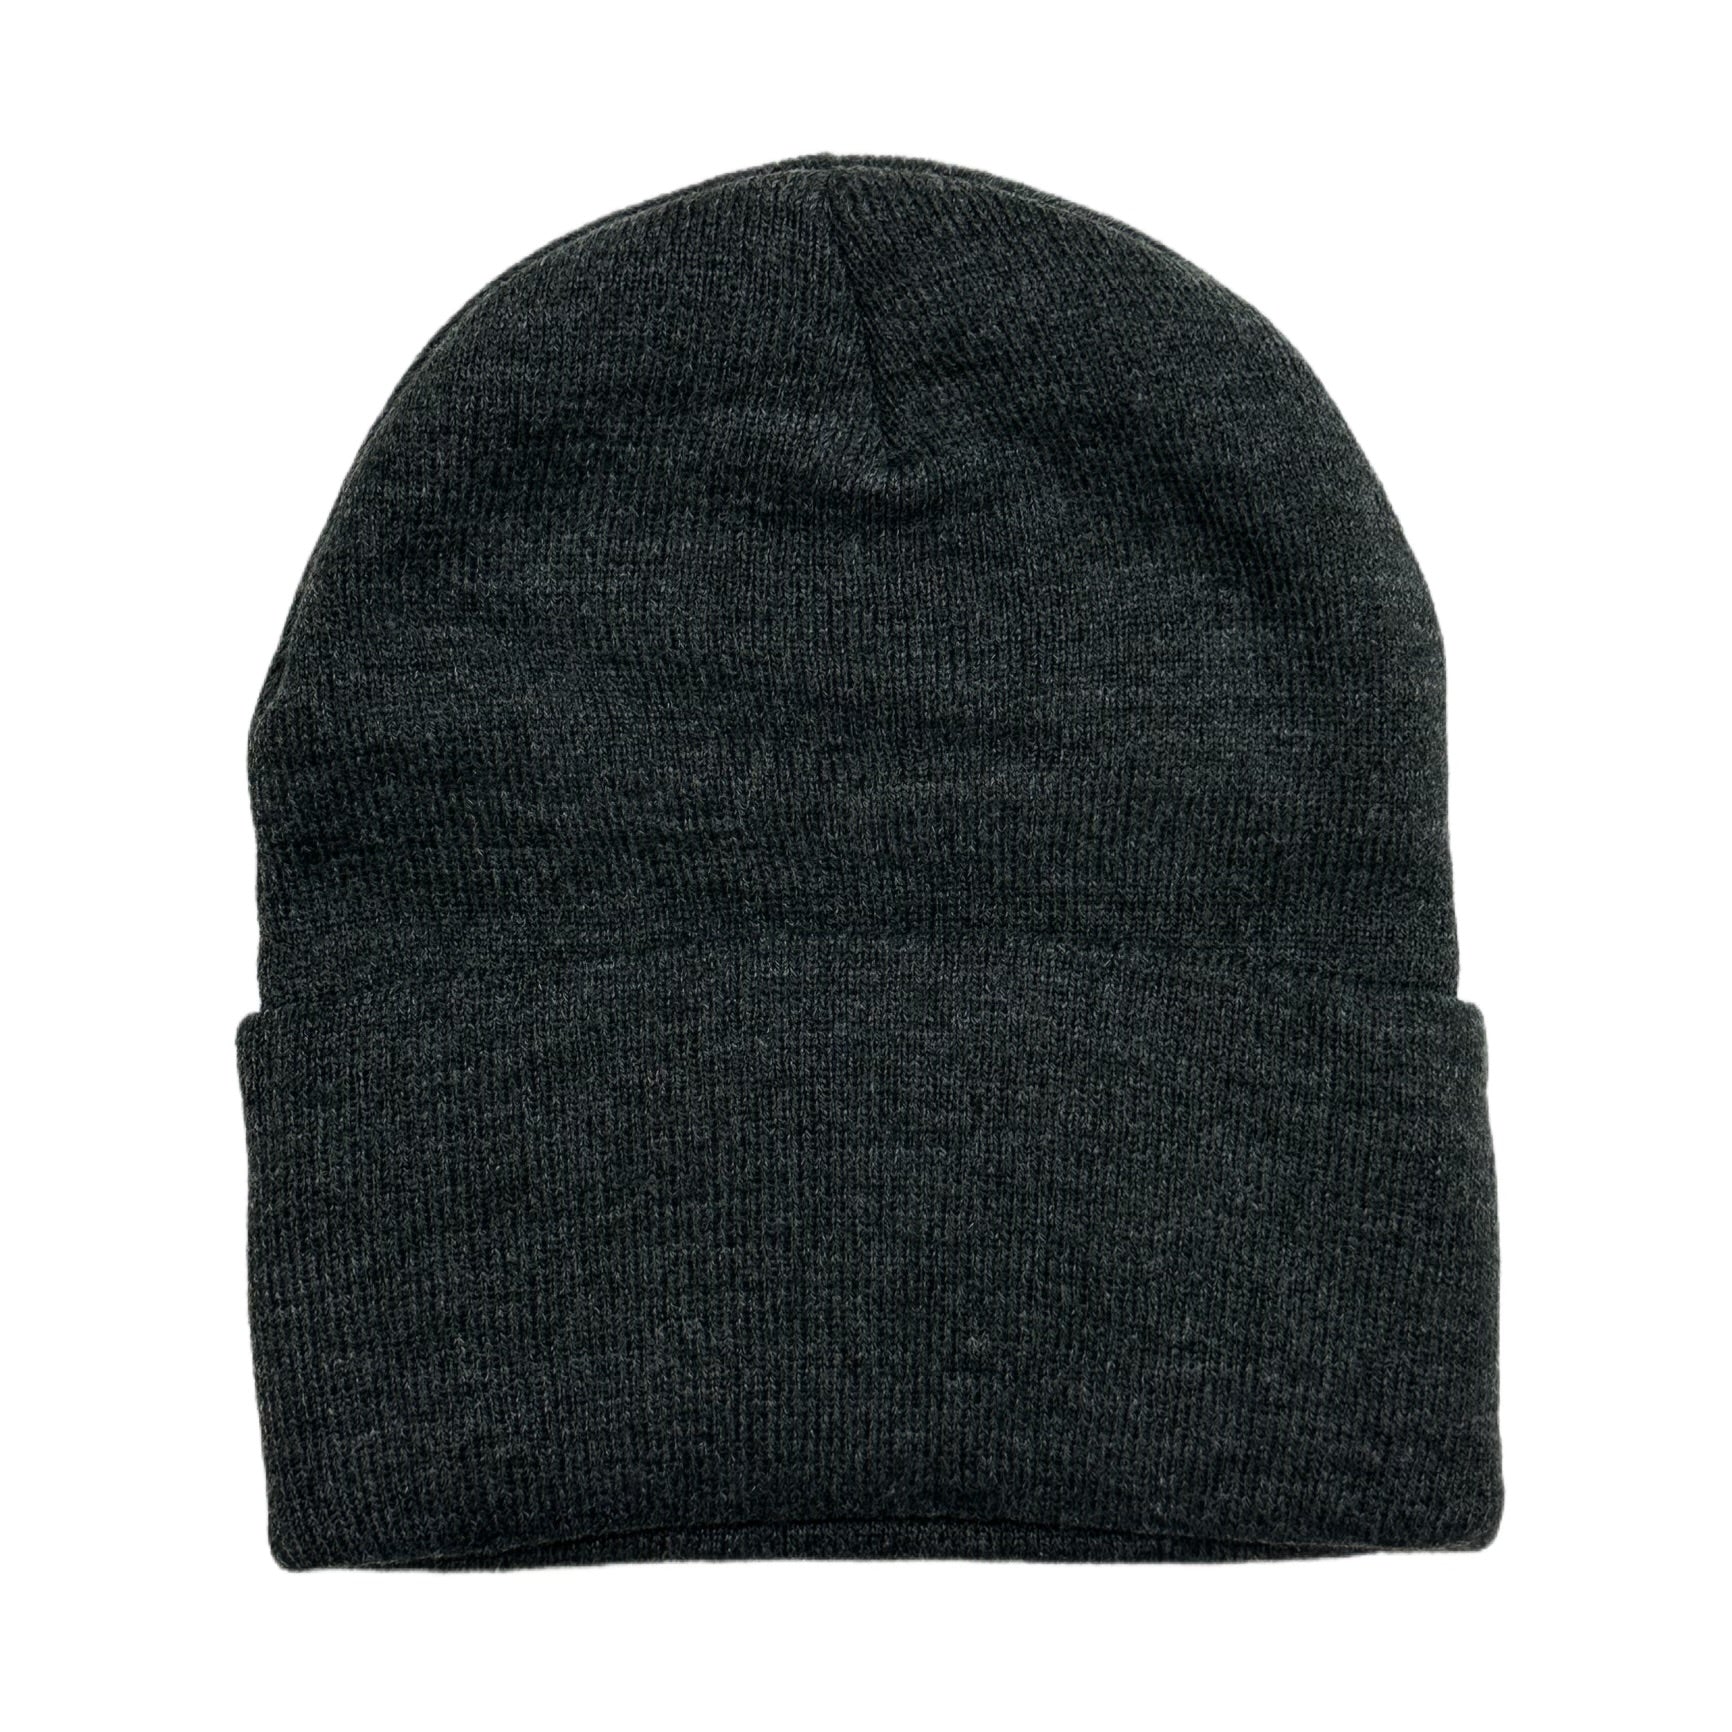 TFashion Solid Color Beanies (Black/Charcoal Grey/Heather Grey/Navy/Brown)